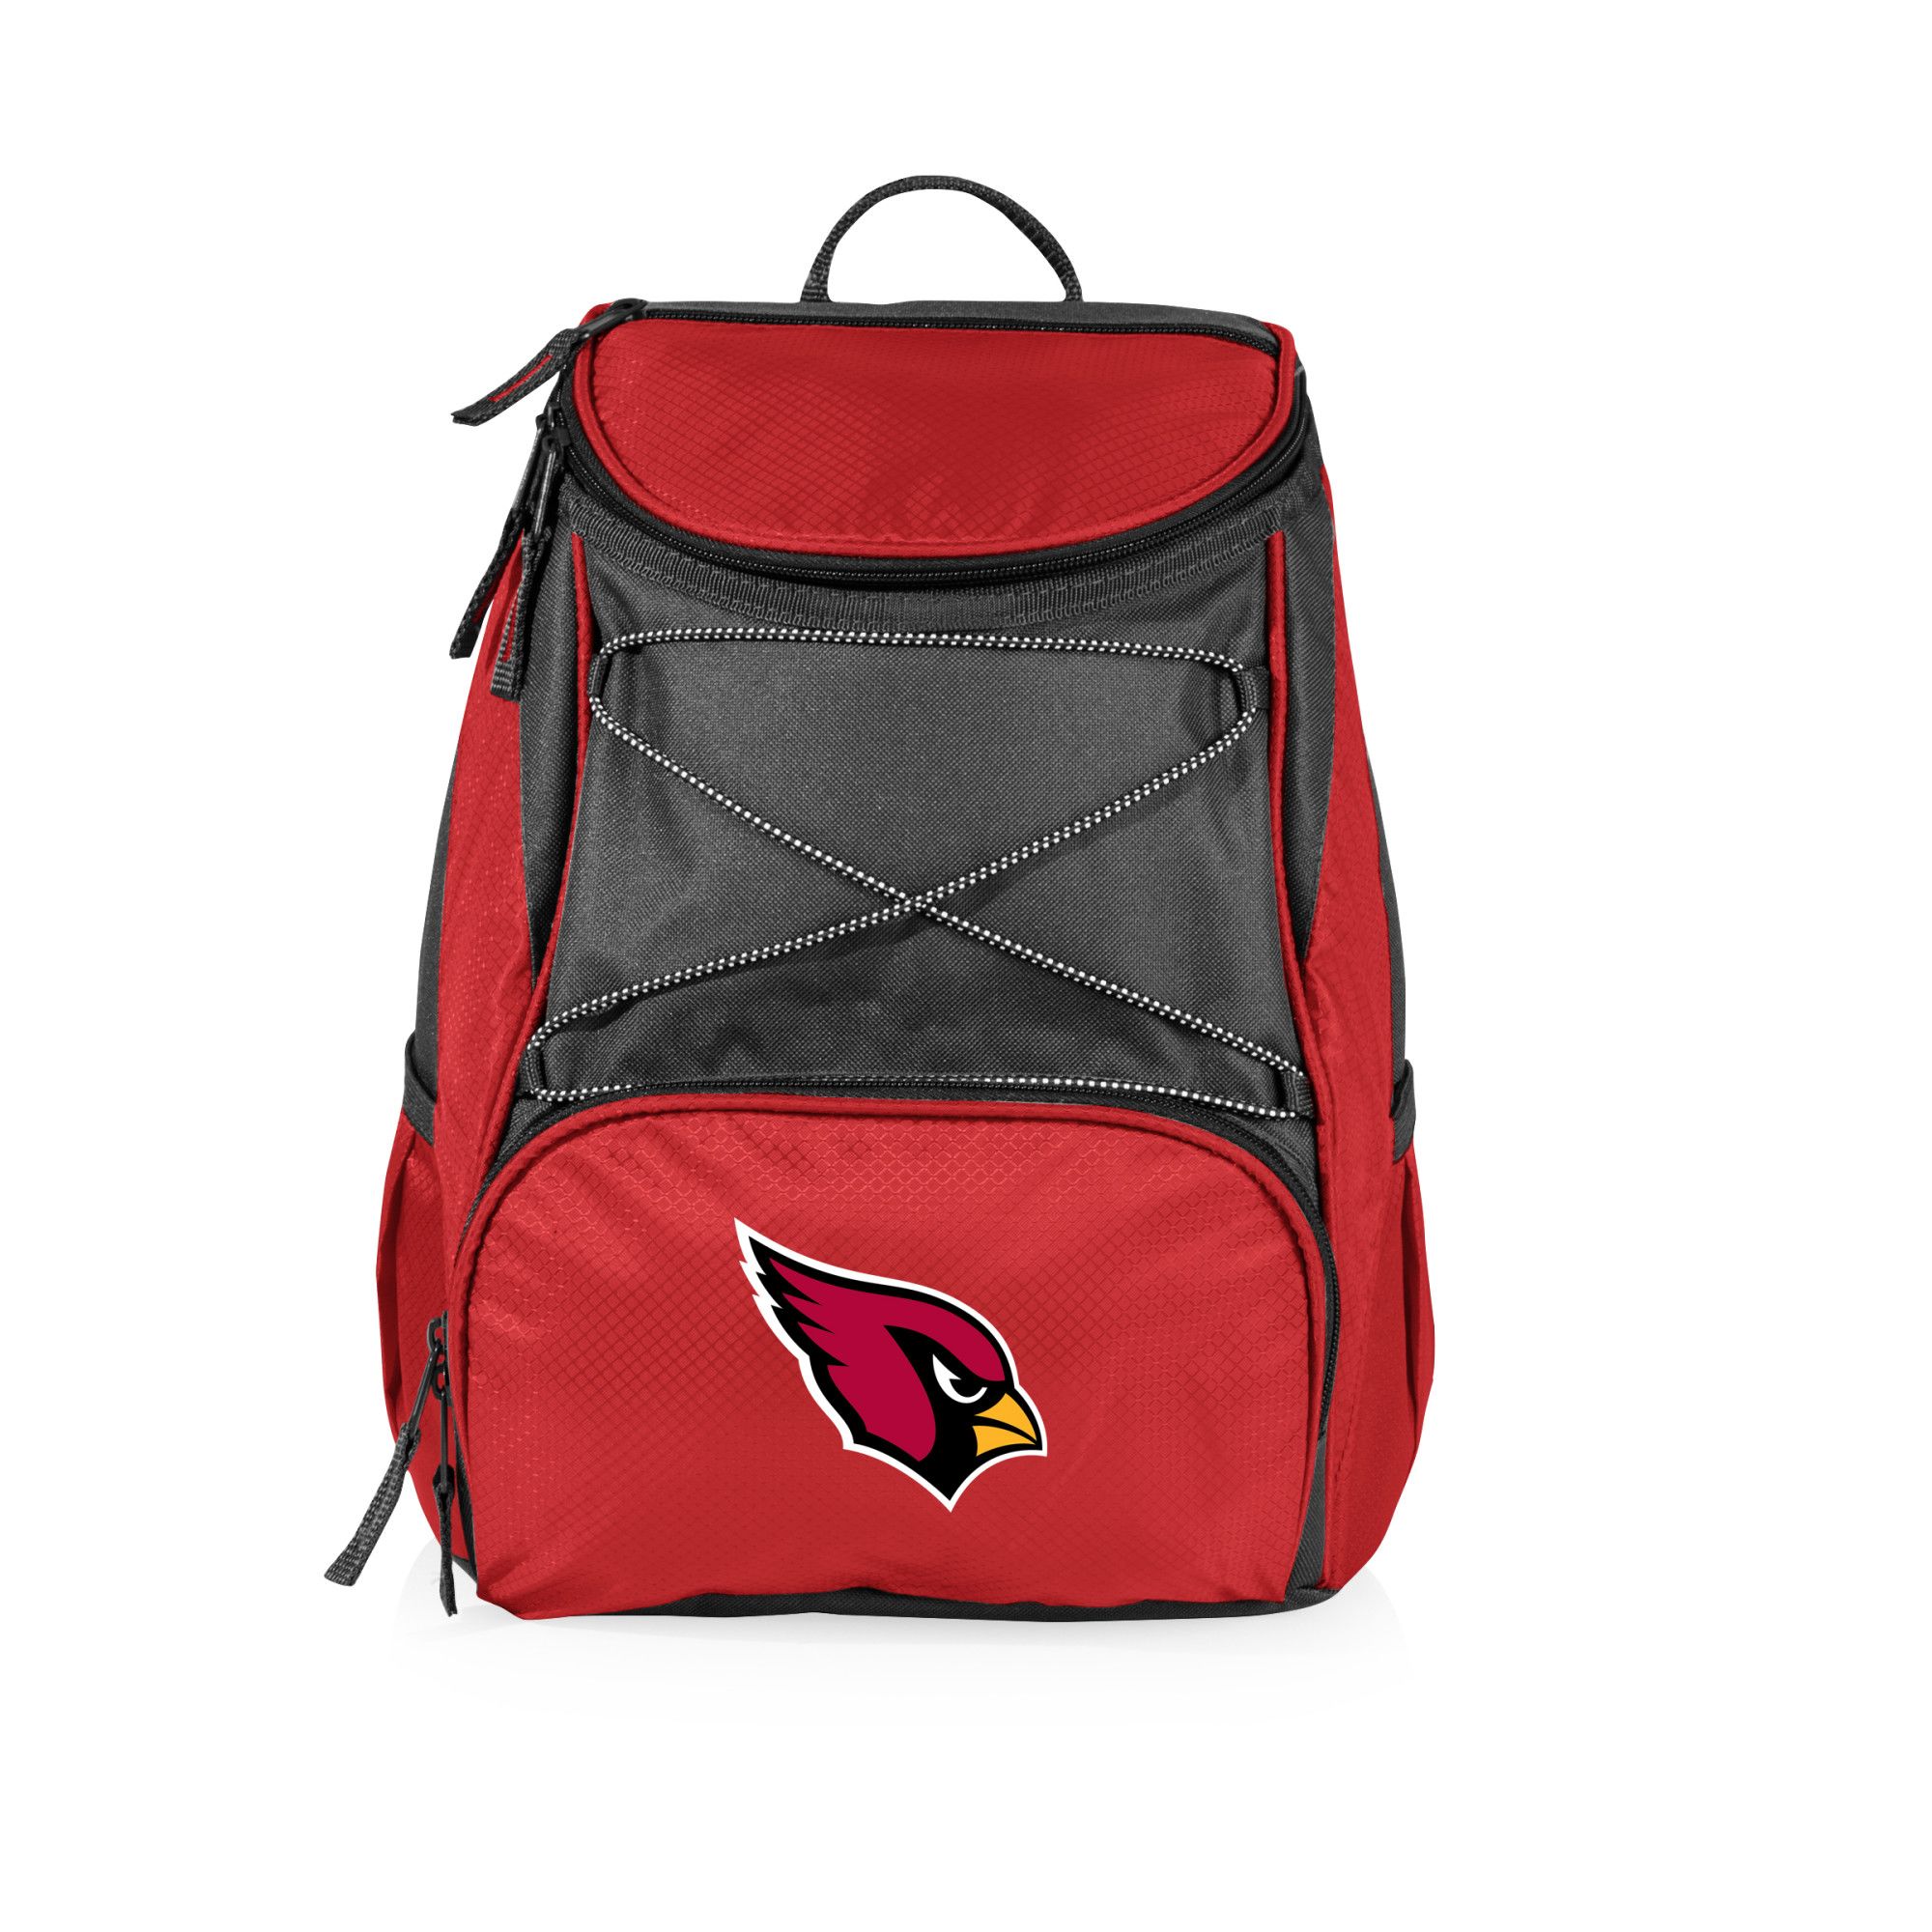 Picnic Time - Arizona cardinals - ptx backpack cooler, (red with gray accents)